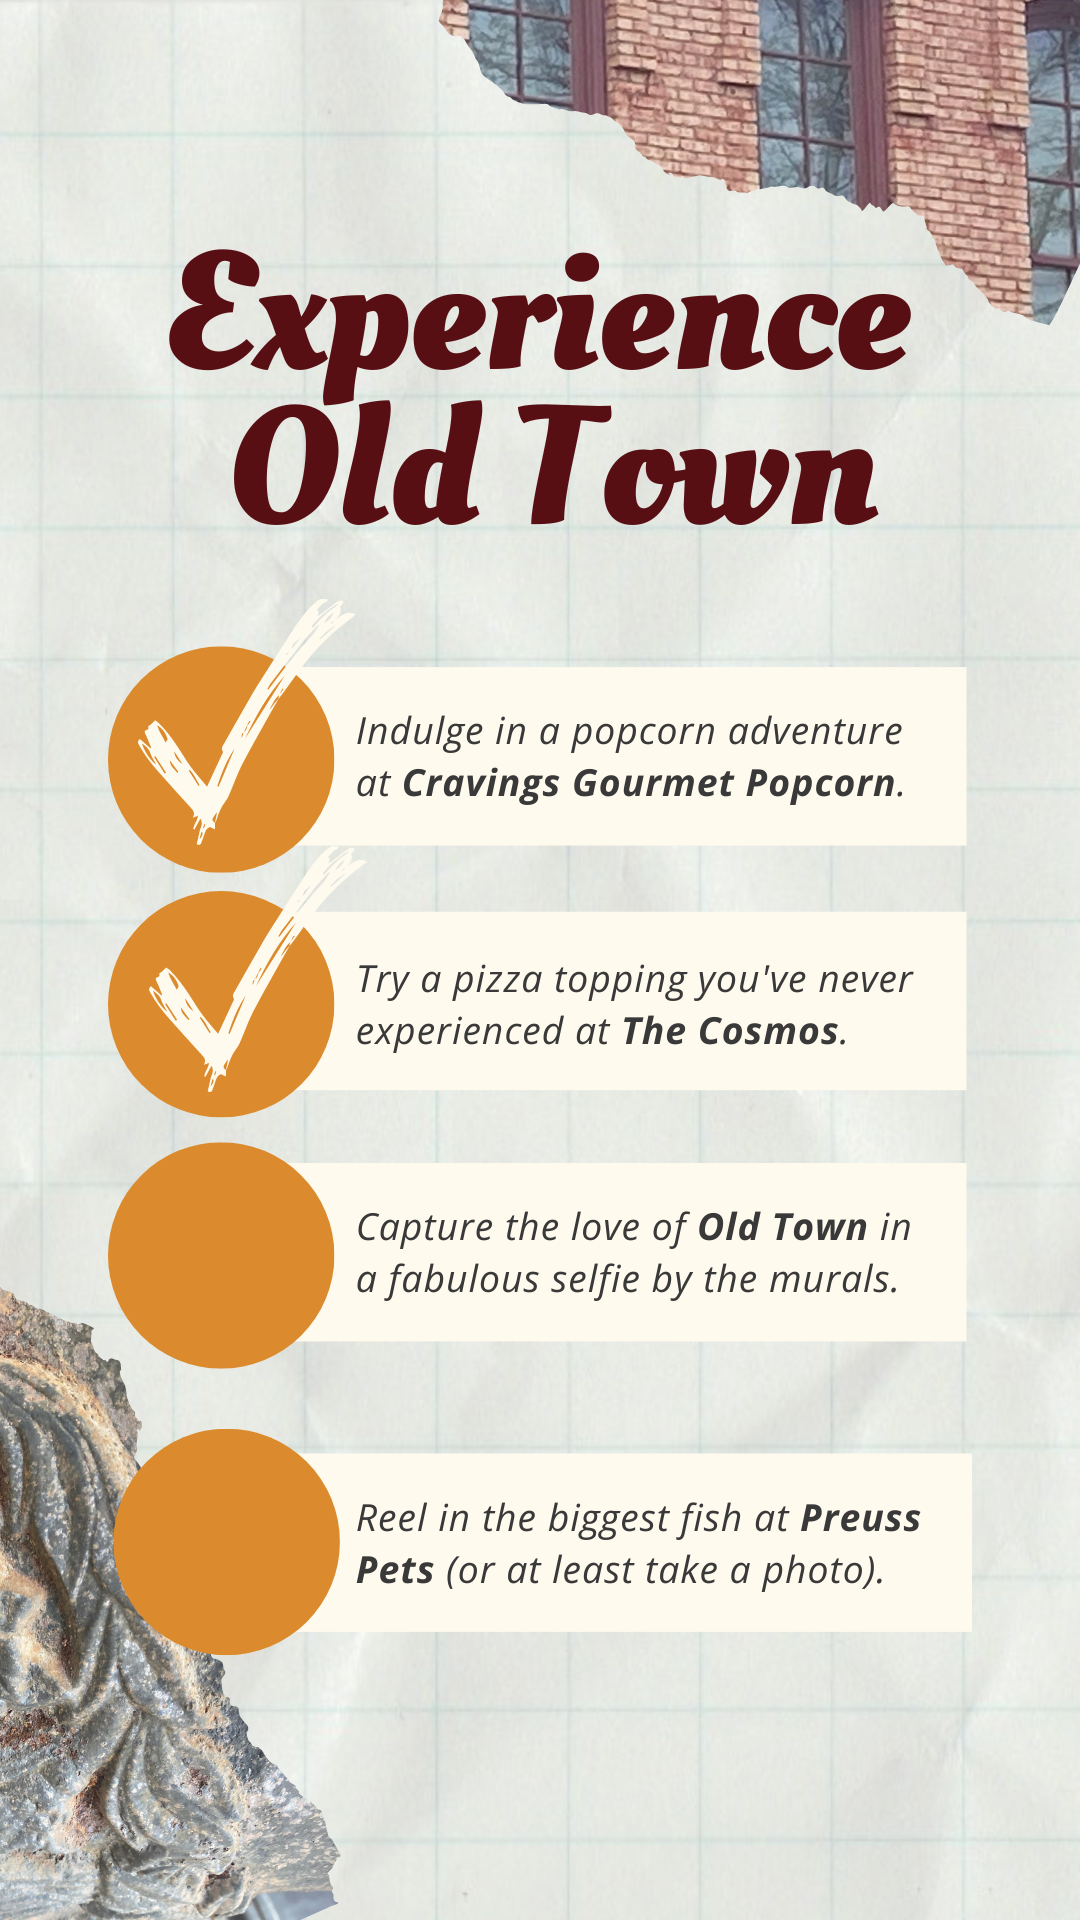 Bucket List to "Experience Old Town." Indulge in a popcorn adventure at Cravings Gourmet Popcorn. Try a pizza topping you've never experienced at The Cosmos. Capture the love of Old Town in a fabulous selfie by the murals. Reel in the biggest fish at Preuss Pets (or at least take a photo).